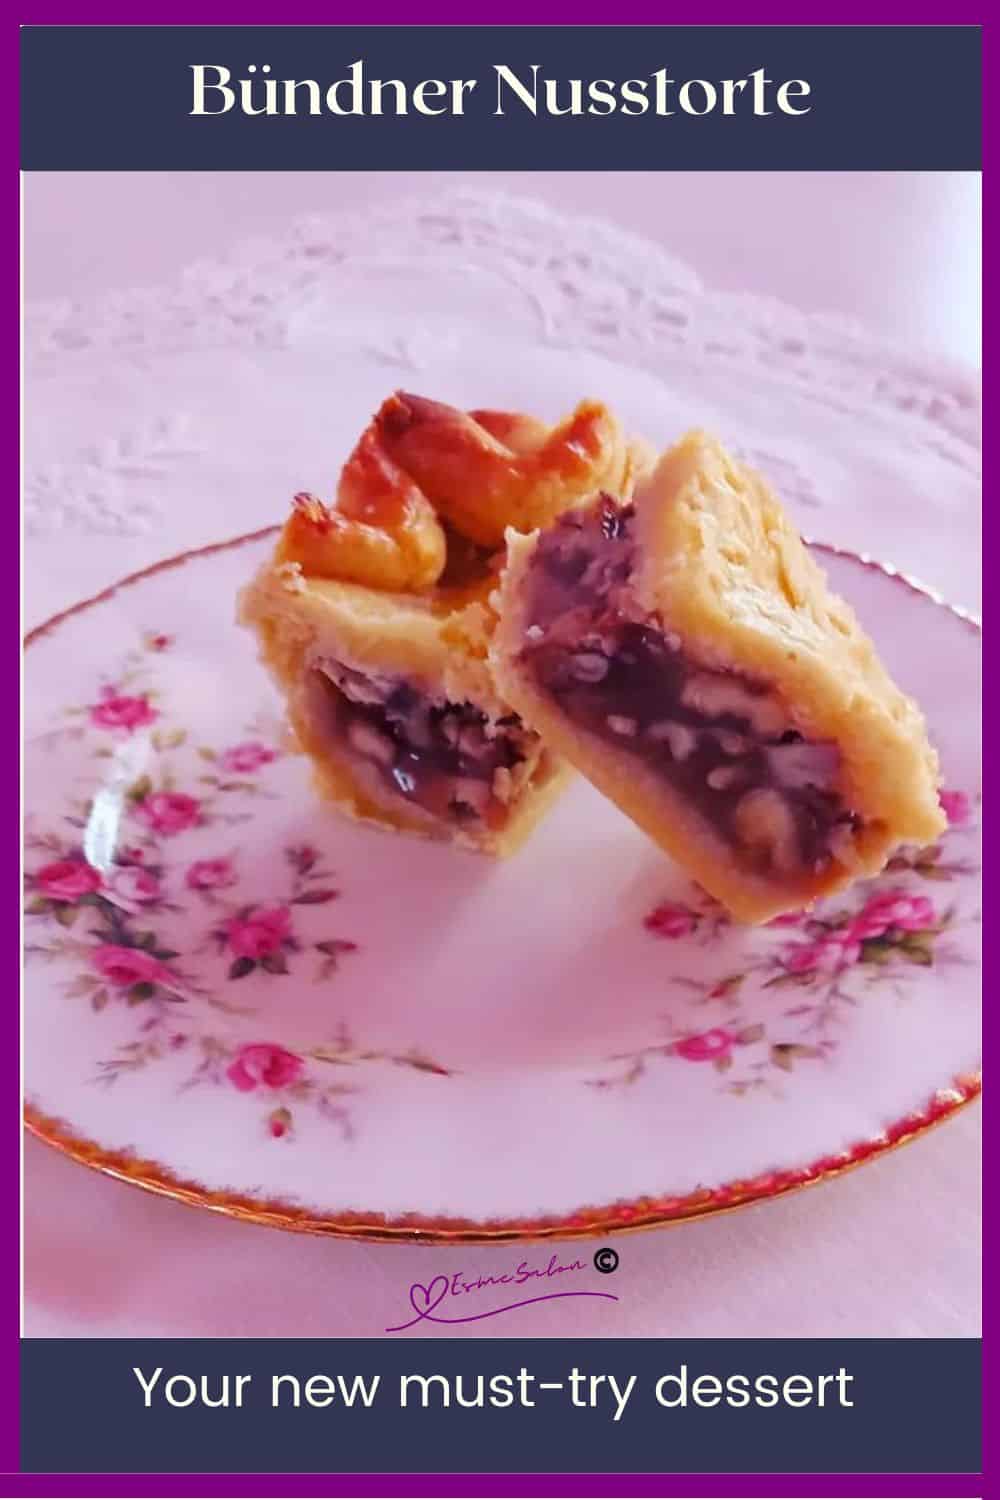 An image of a Swiss nut-filled pastry, Bündner Nusstorte served on a pretty side plate with pink flowers